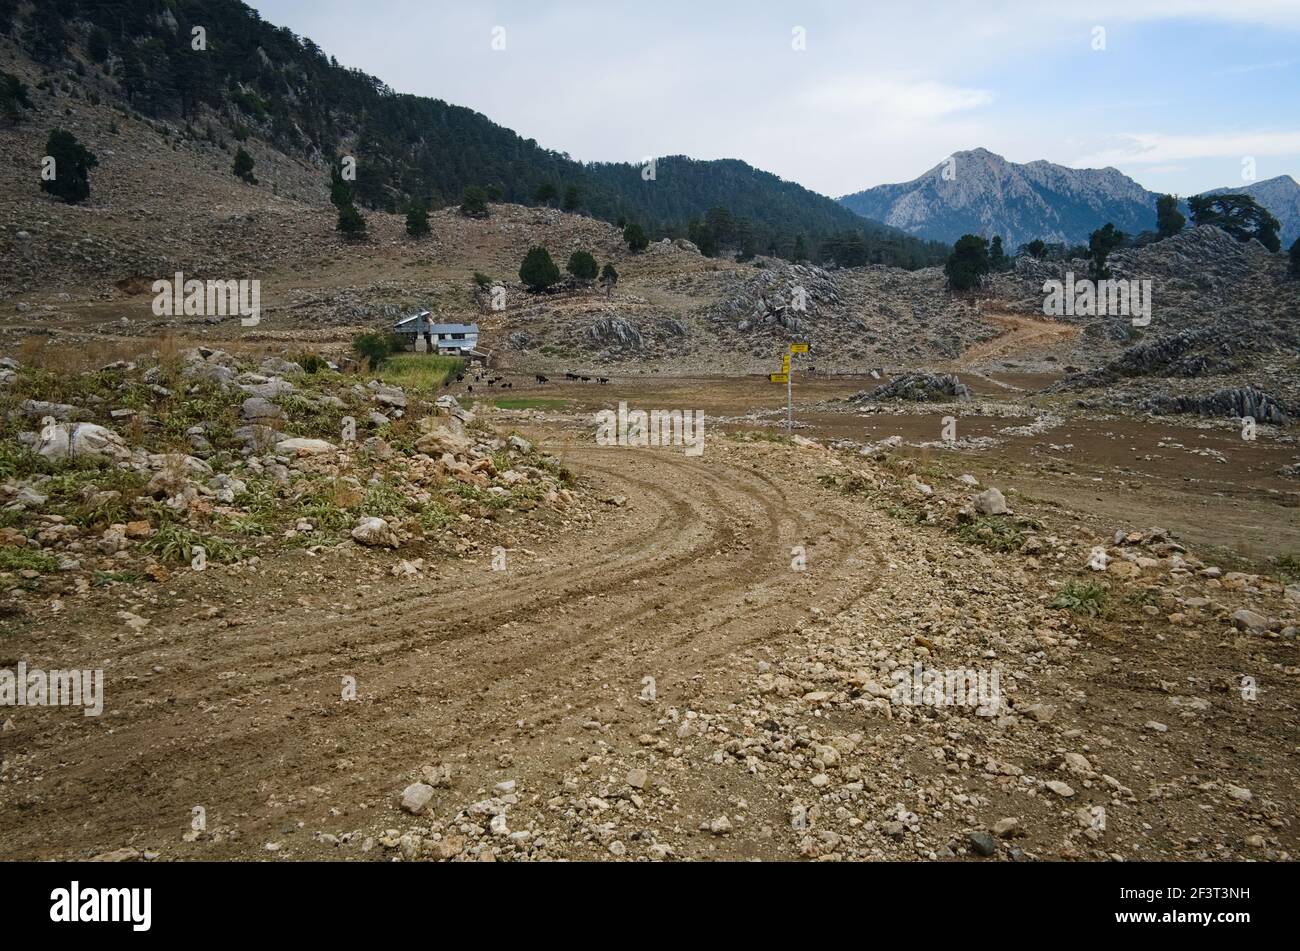 On the Lycian Way in rocky mountains in Turkey. Dirt road on the plateau. Stock Photo